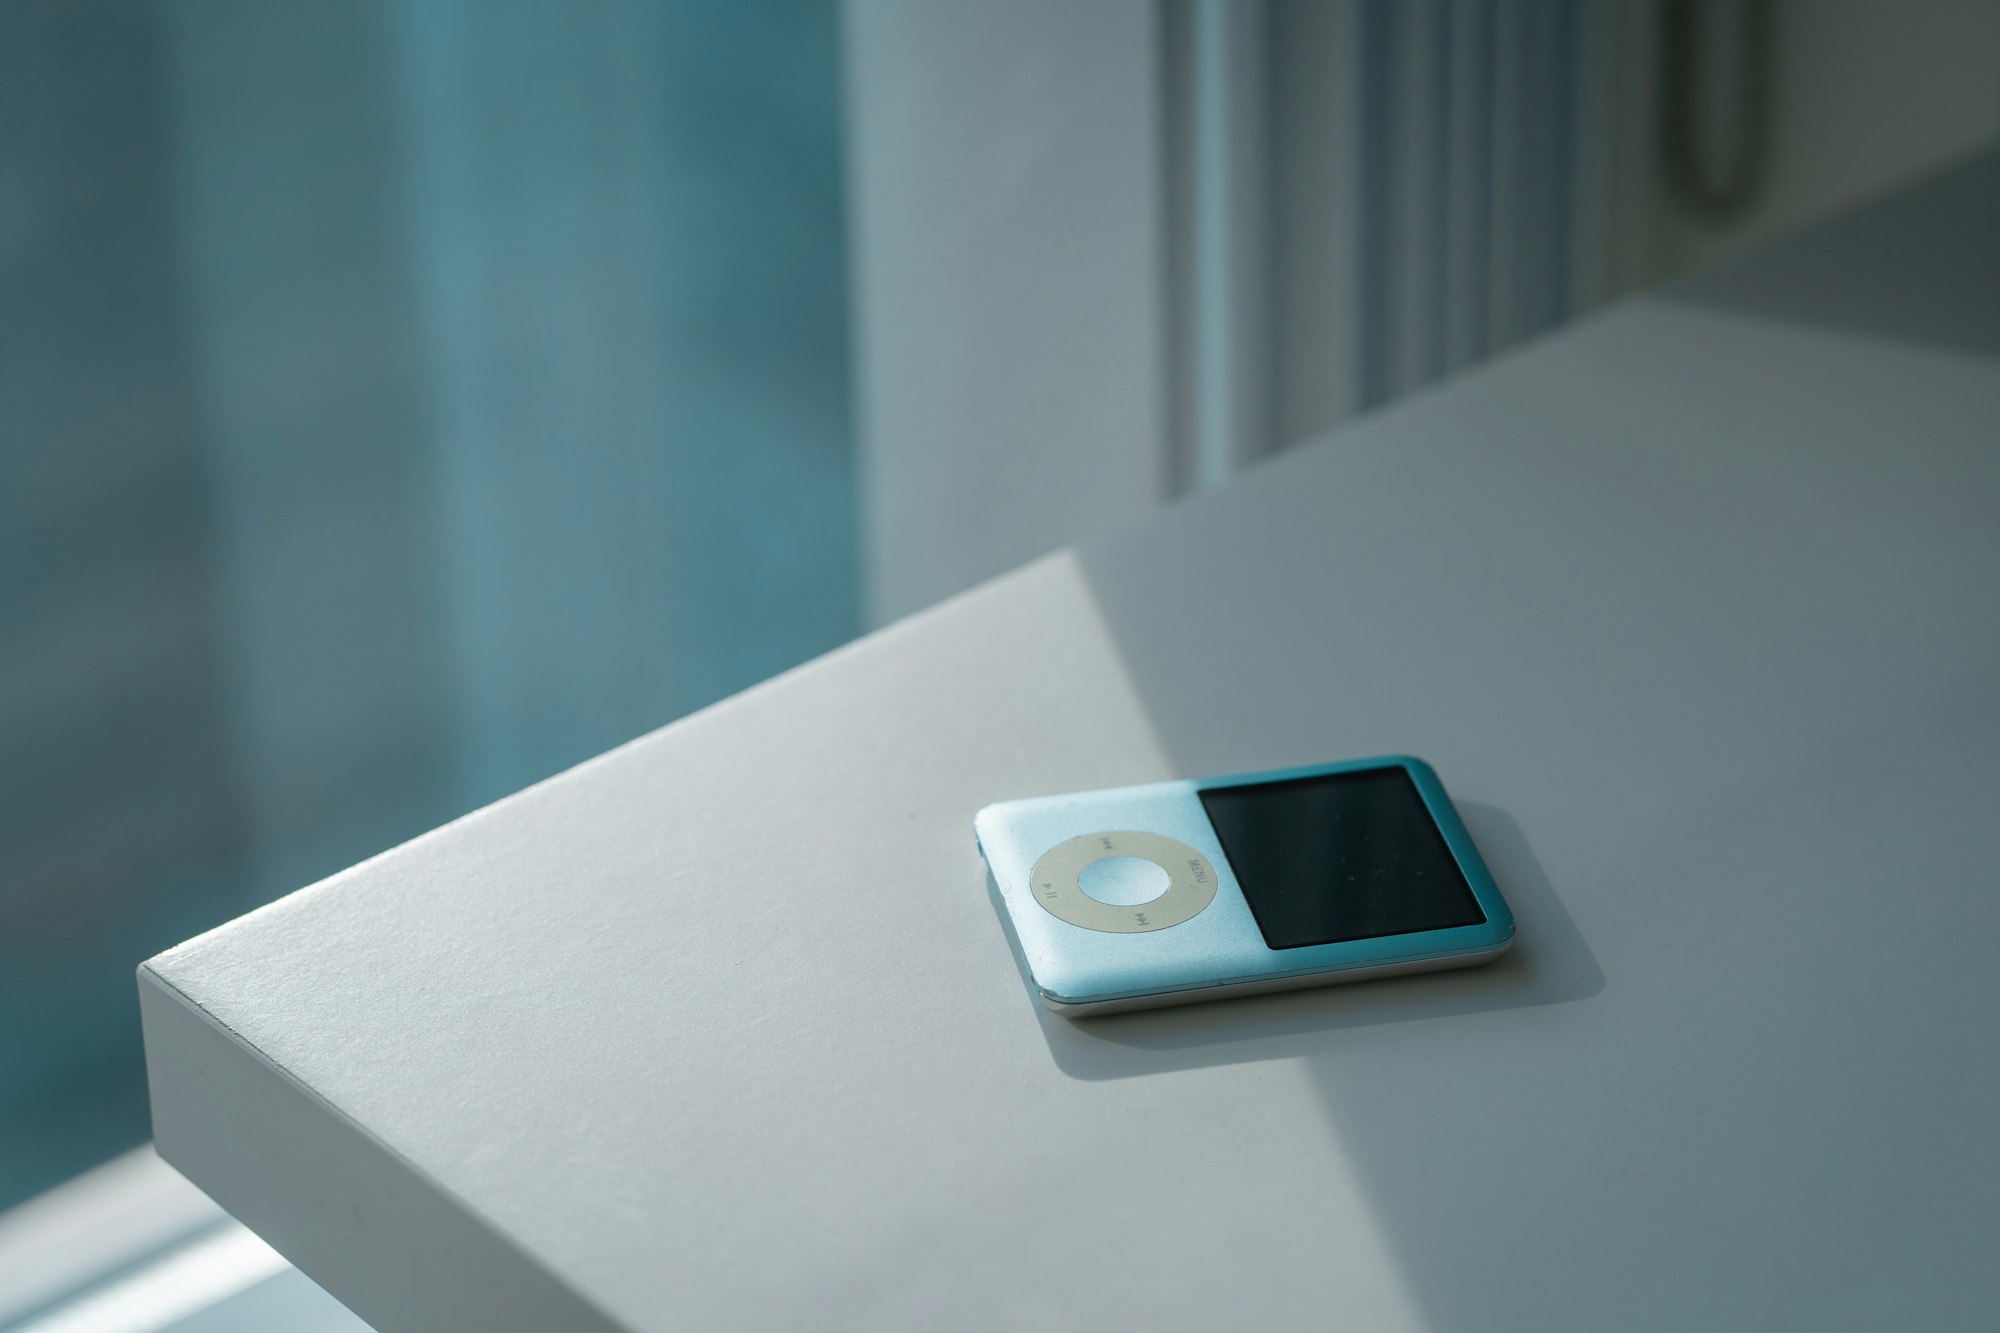 A picture of an iPod on a counter.